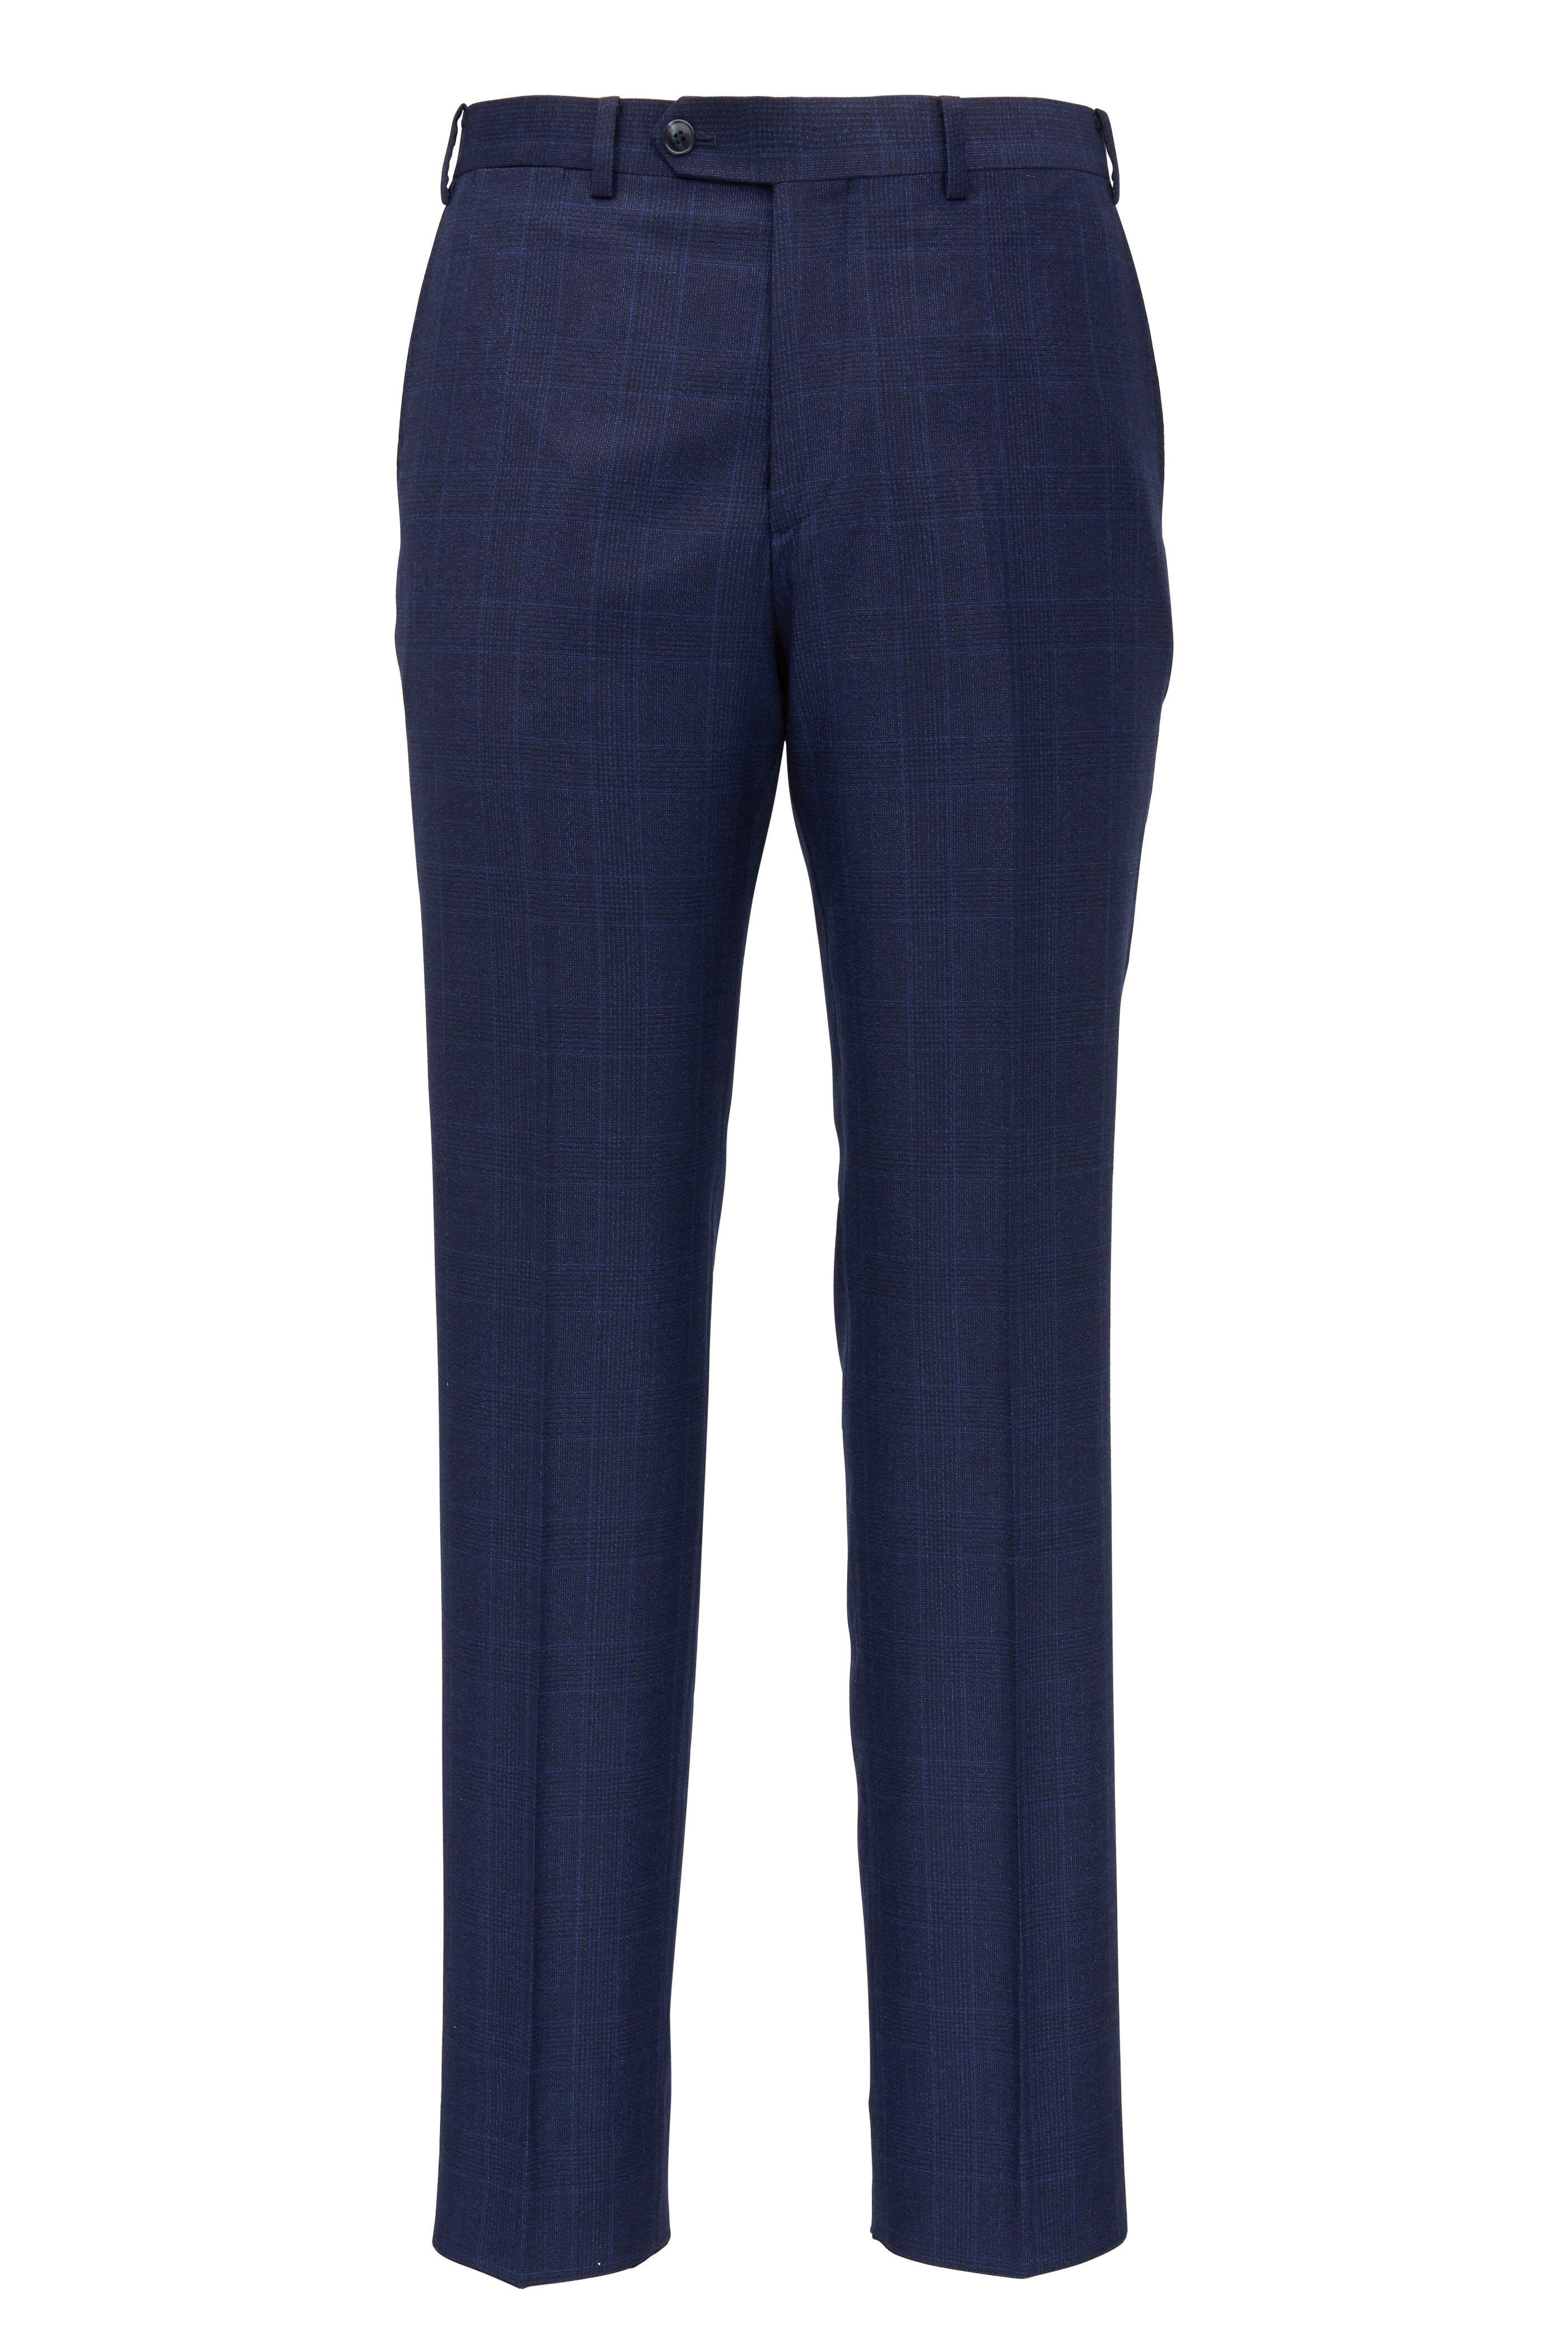 Atelier Munro - Navy Blue Tonal Plaid Wool Suit | Mitchell Stores